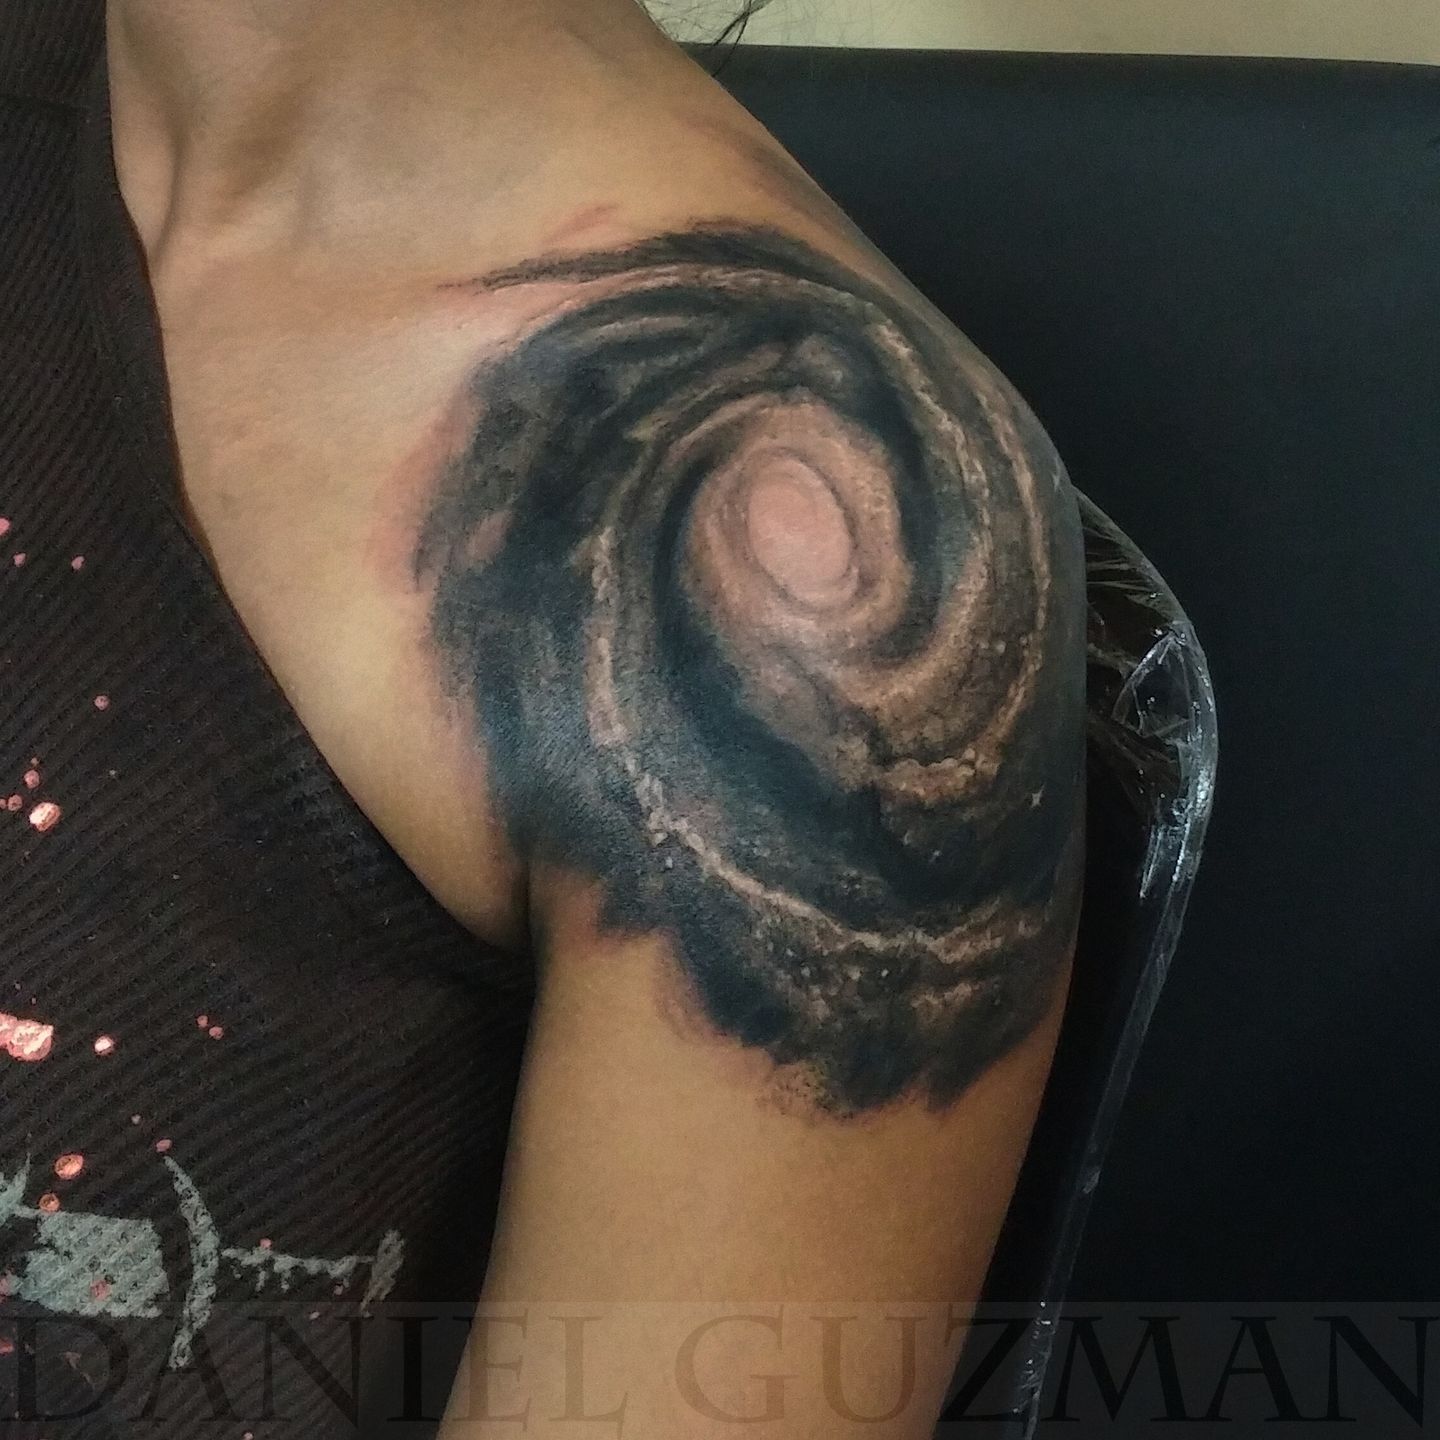 63 Brilliant Galaxy Tattoos YouLl Find Out Of This World  Psycho Tats